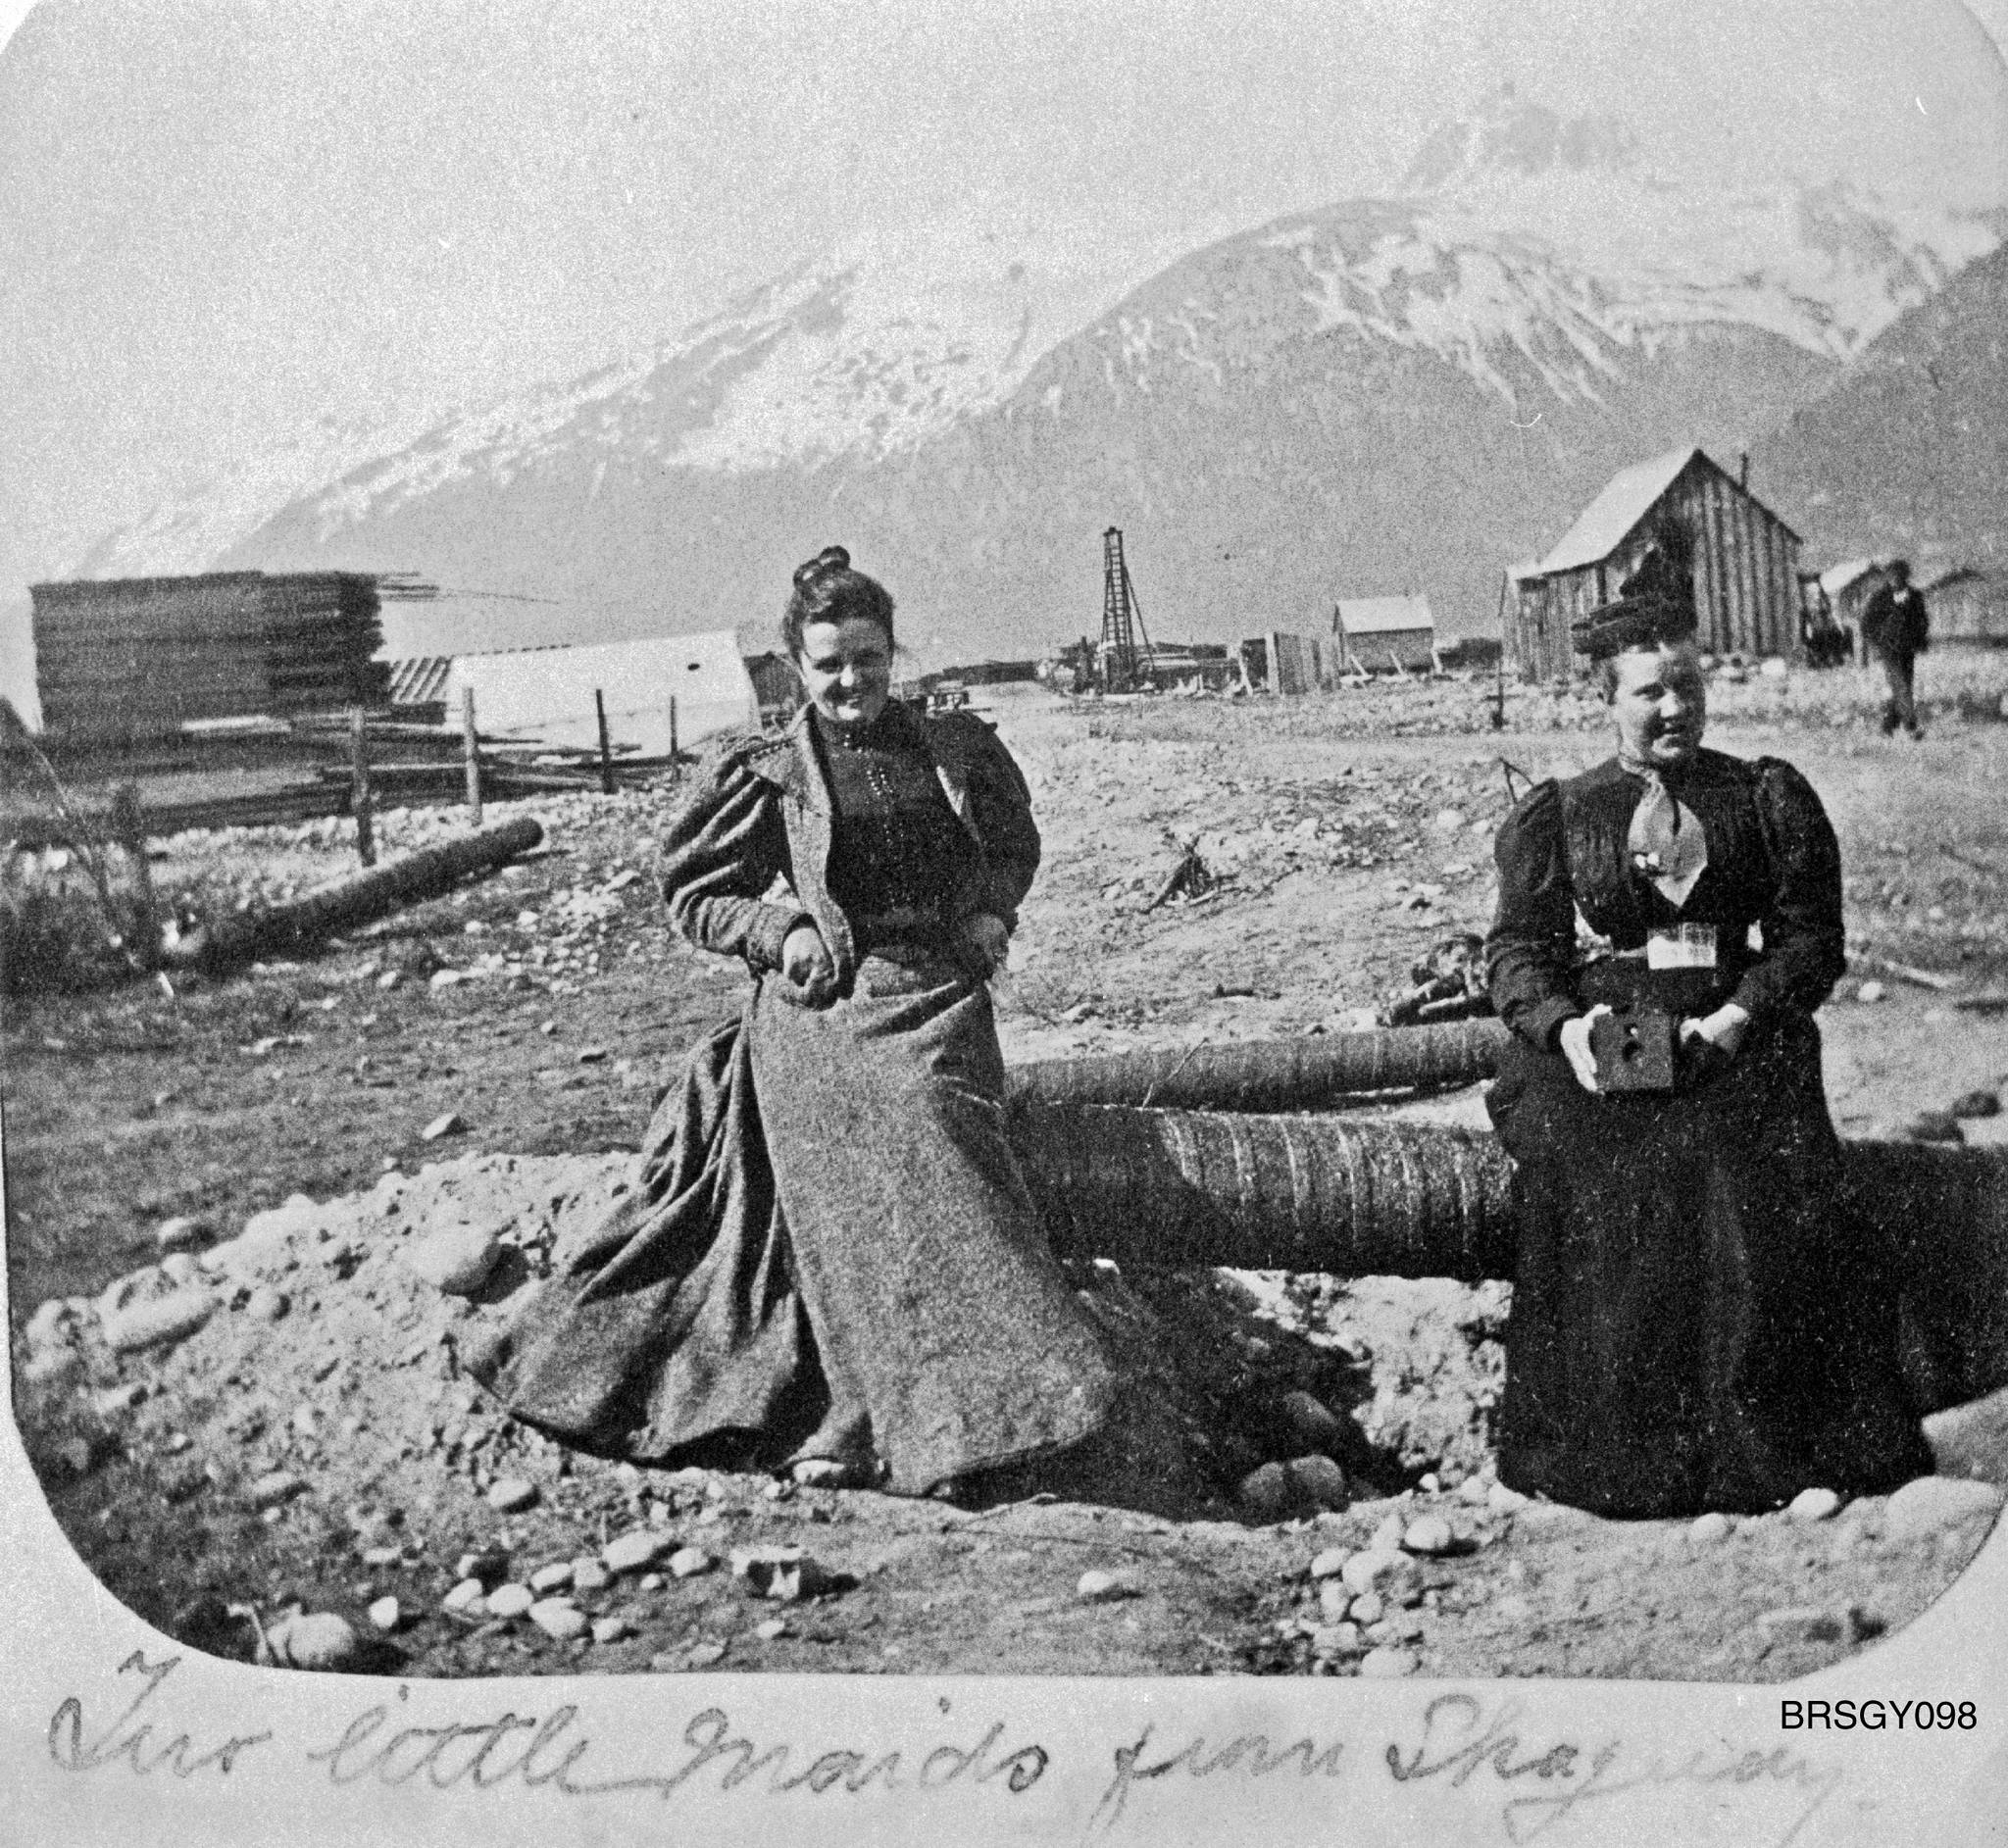 “Two little maids from Skagway” looking southwest down Main Street, circa summer 1898. Mollie Brackett, left, and Mrs. Tuckerman sit on a wood stave pipe, which was about to be installed on Main Street, possibly at the cross street of 3rd Ave. Tuckerman is holding a woodbox camera probably similar to the one Brackett used. (Courtesy Photo | National Park Service, Klondike Gold Rush National Historical Park, Brackett Family Collection, BRSGY089, KLGO SP-143-5368)